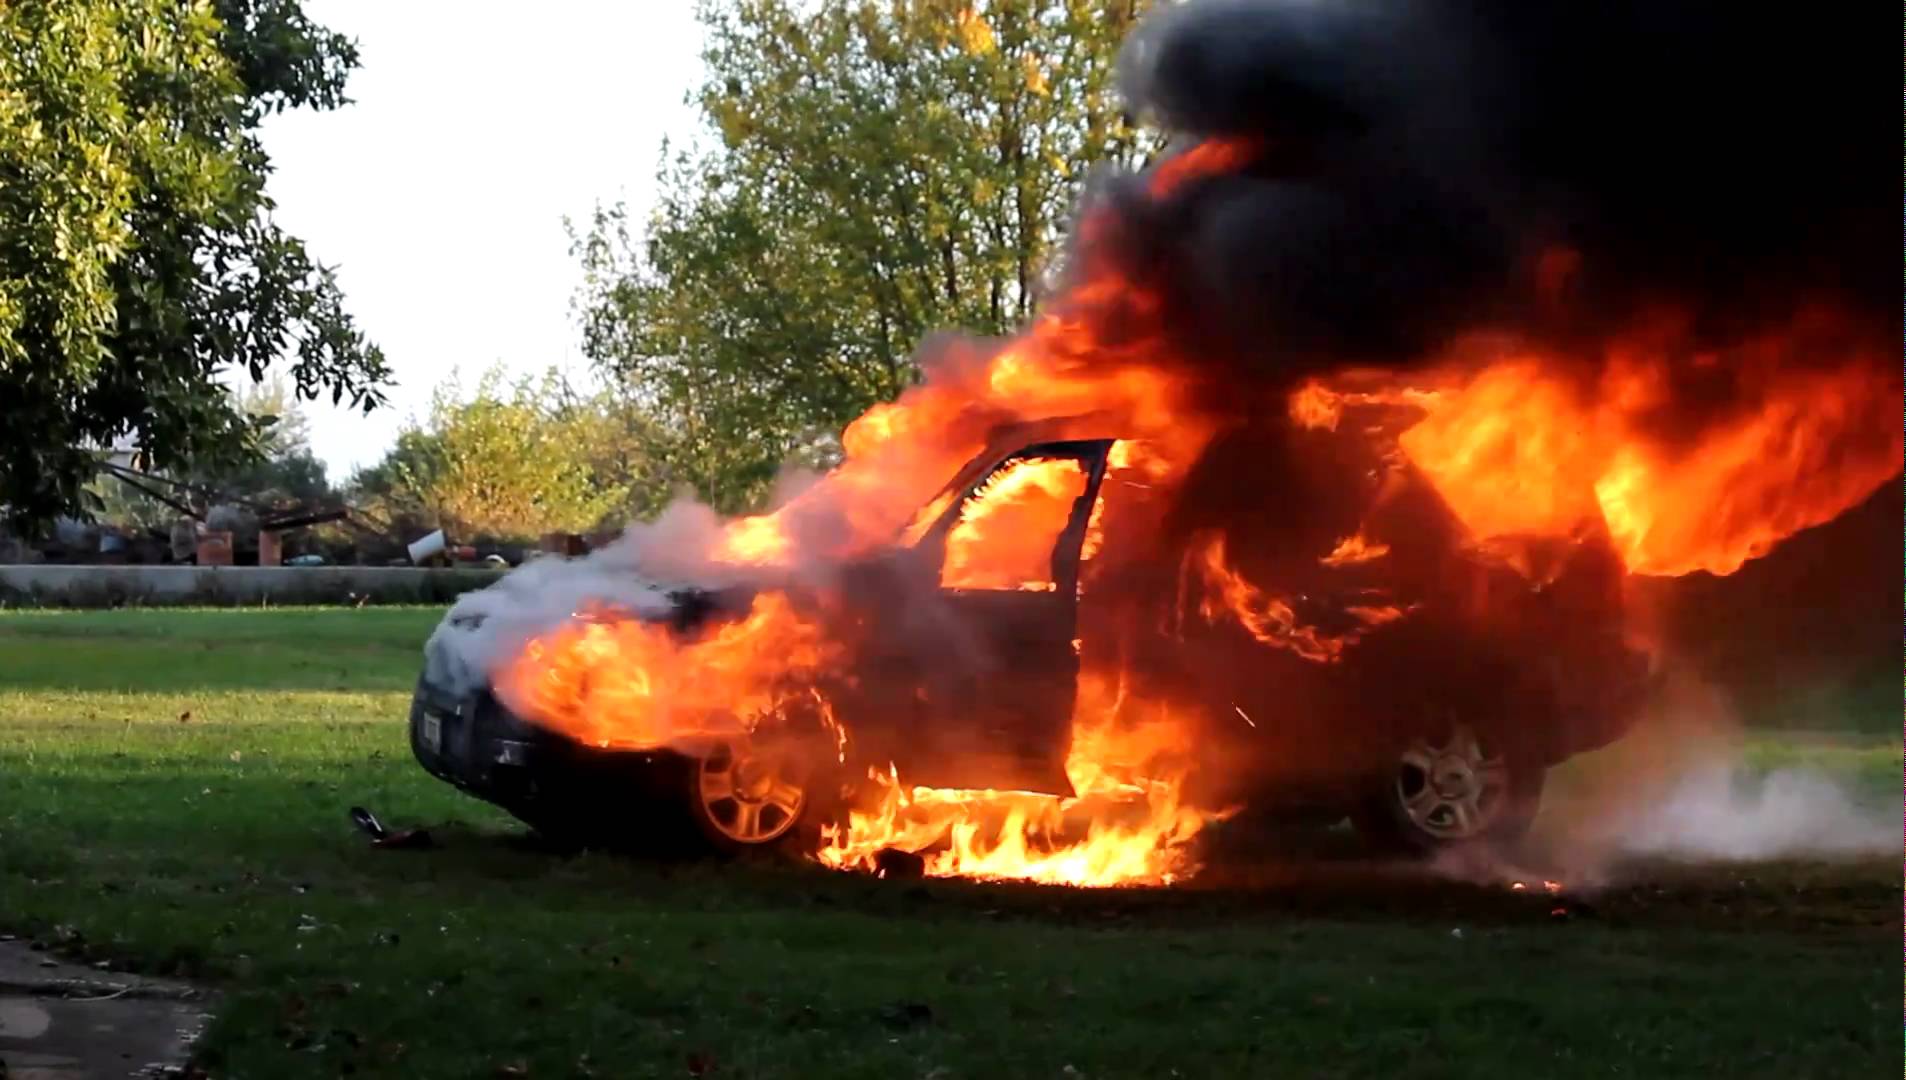 SUV ON FIRE - YouTube